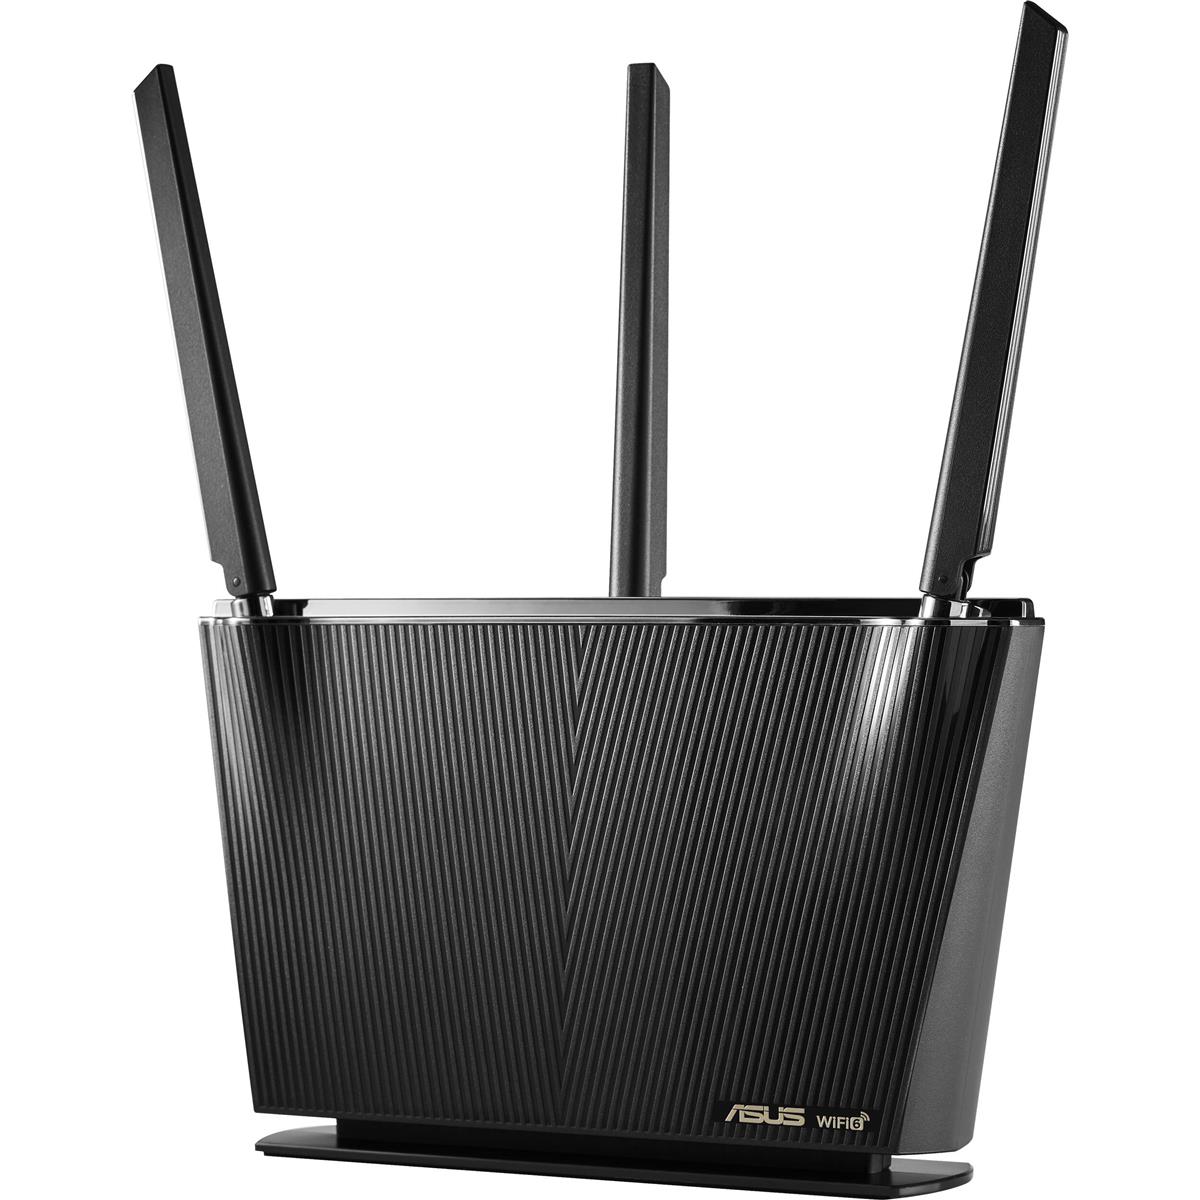 ASUS RT-AX68U AX2700 Wireless Dual-Band Gigabit Router $150 + free s/h at Adorama and Amazon